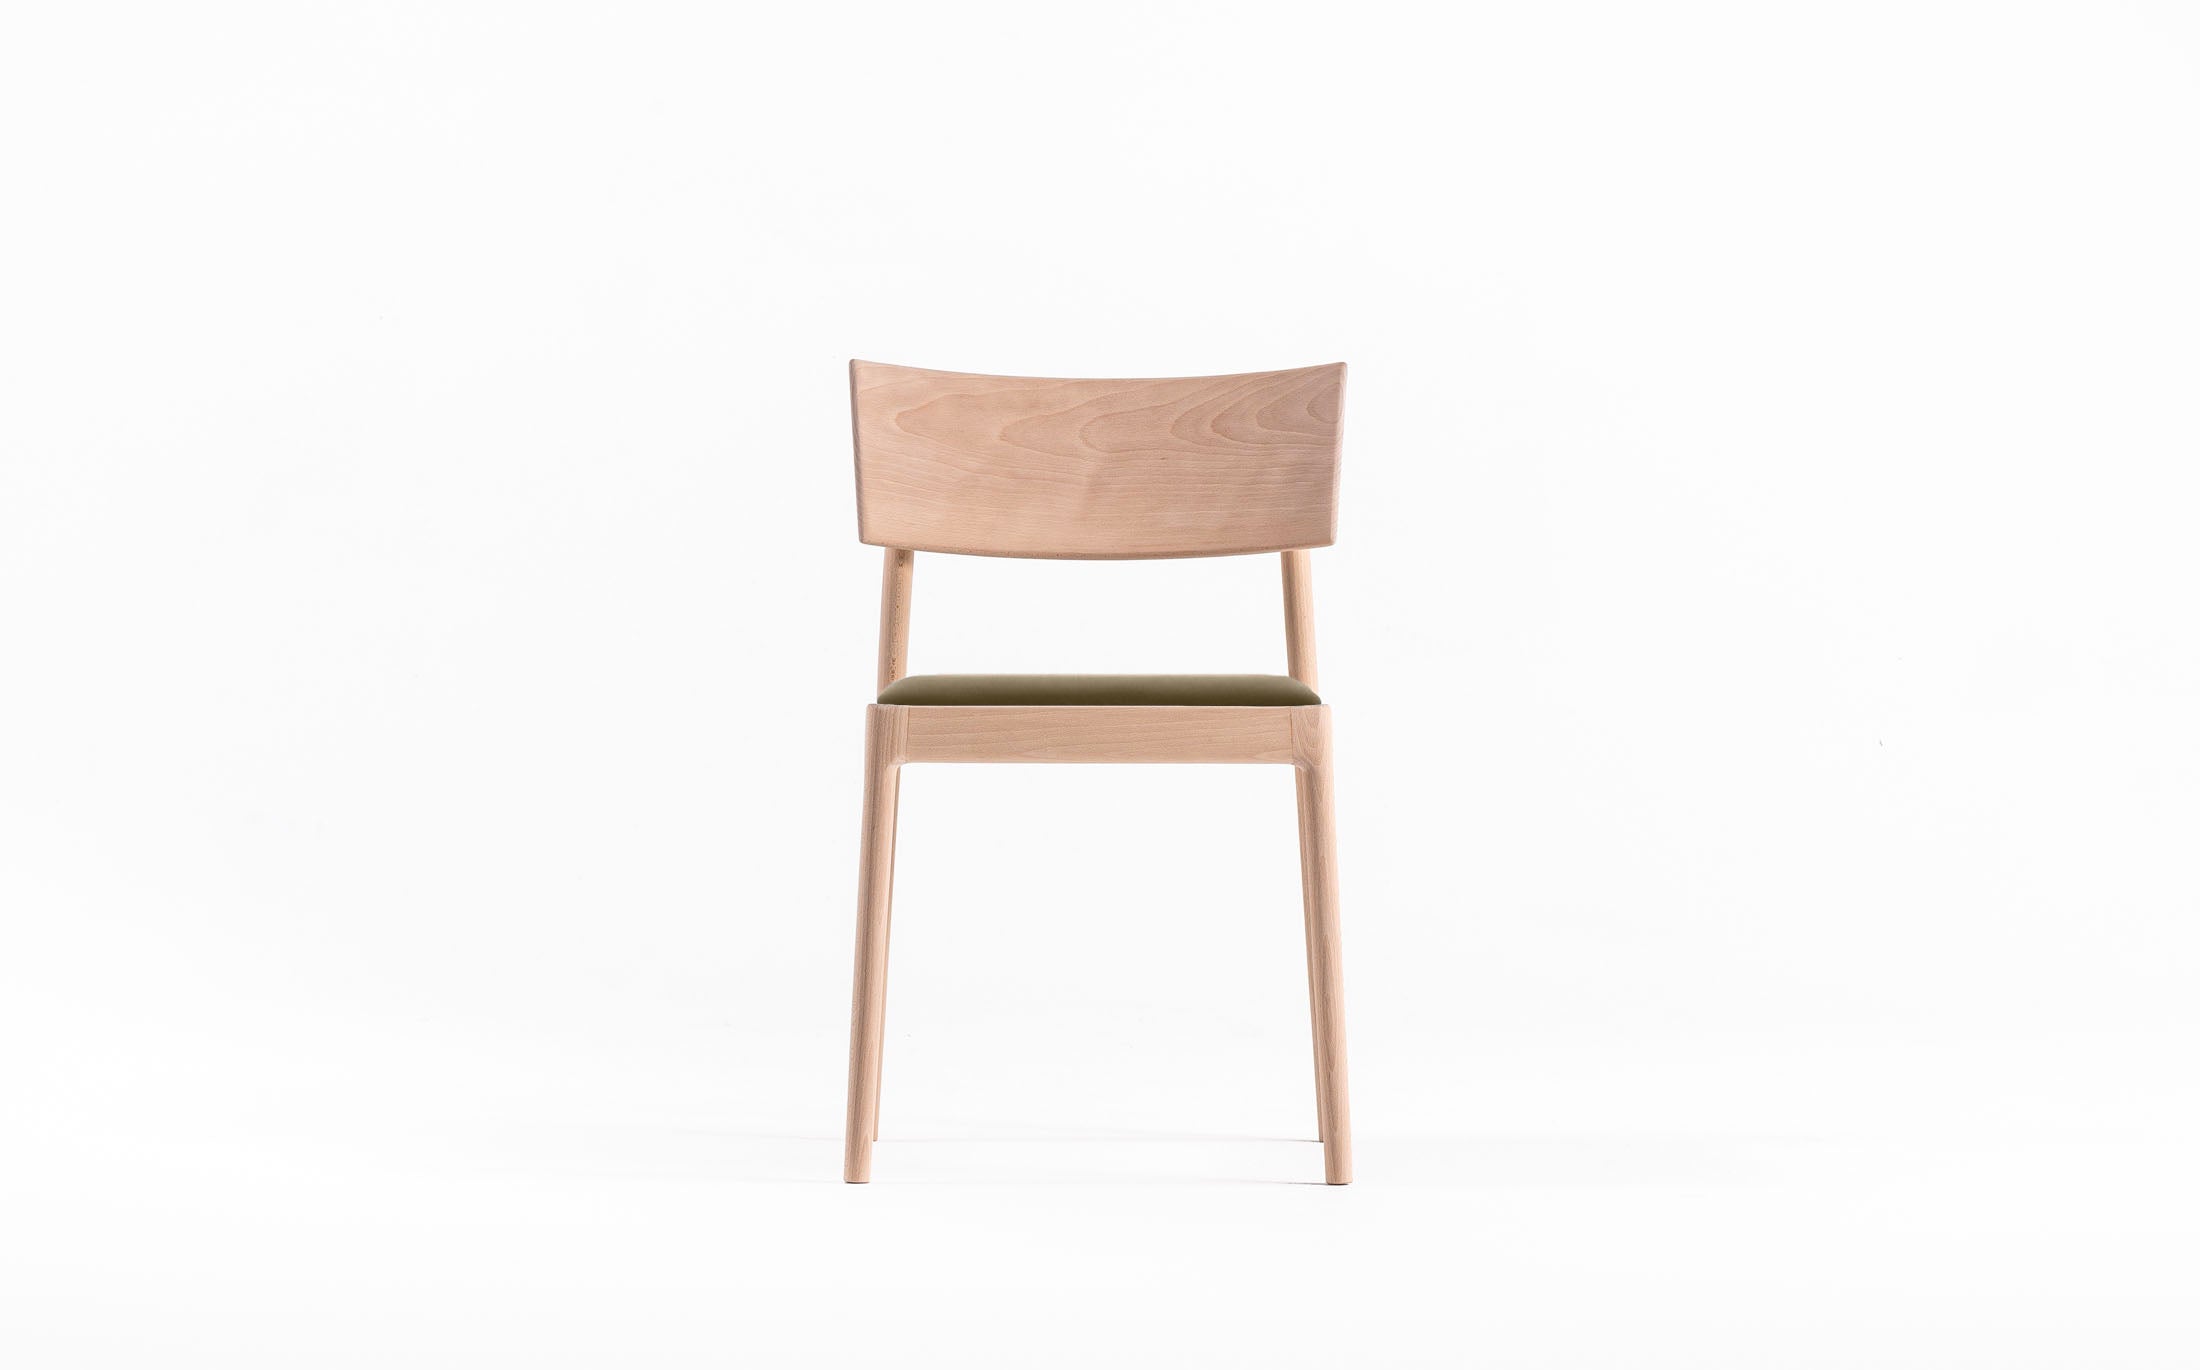 The stacking light chair #Seat materials_smooth leather 40108